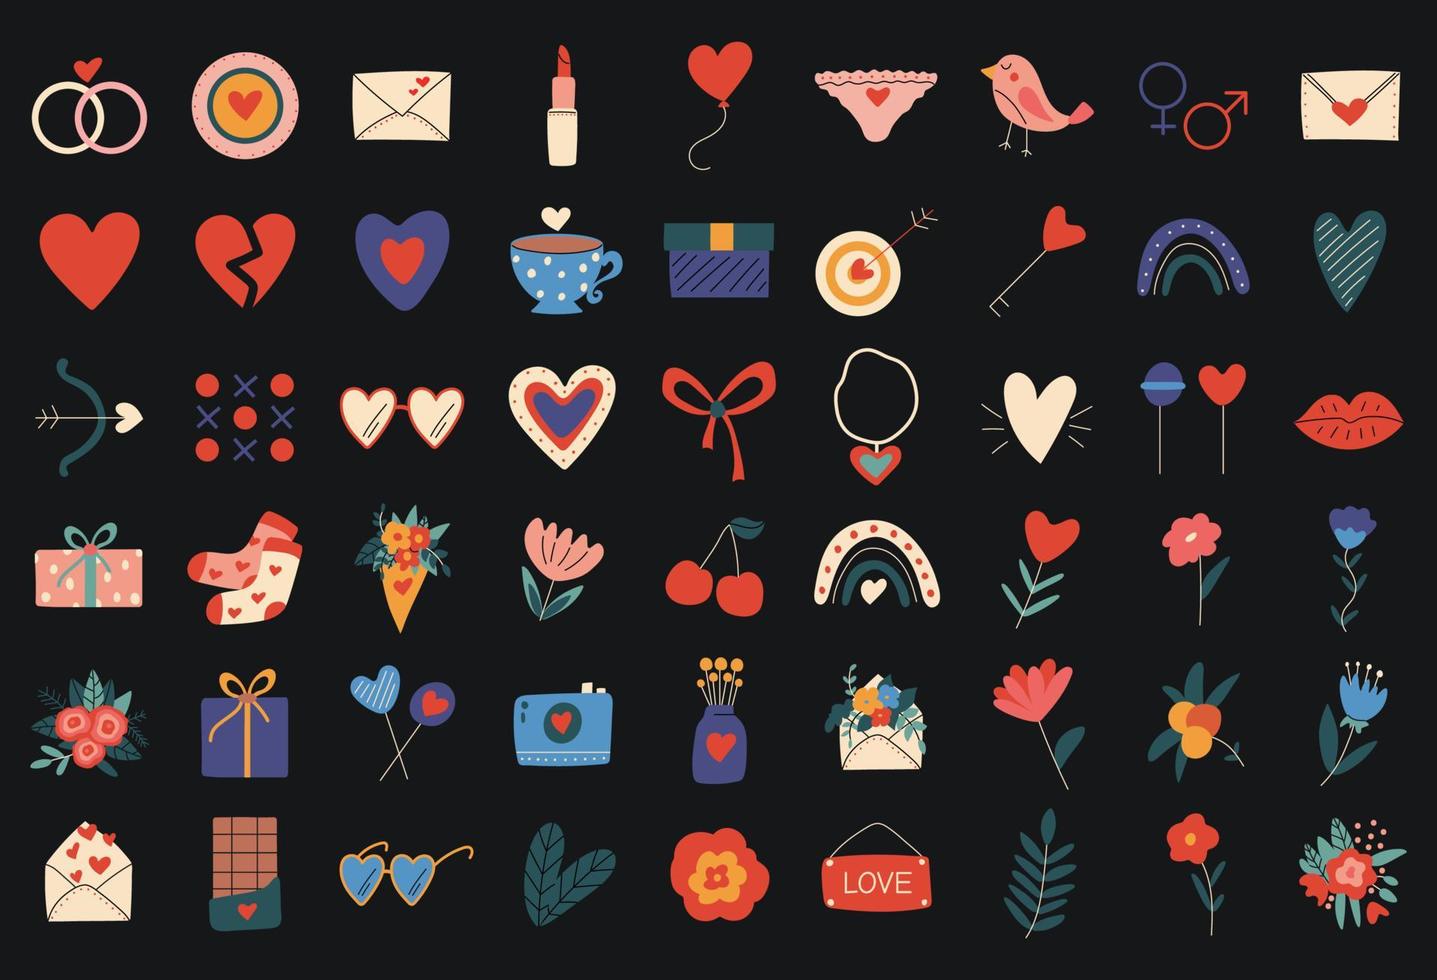 Set of colored icons for valentine's day. Flowers, hearts, envelopes, lips, gifts, candy, chocolate. Round icons on a black background. vector